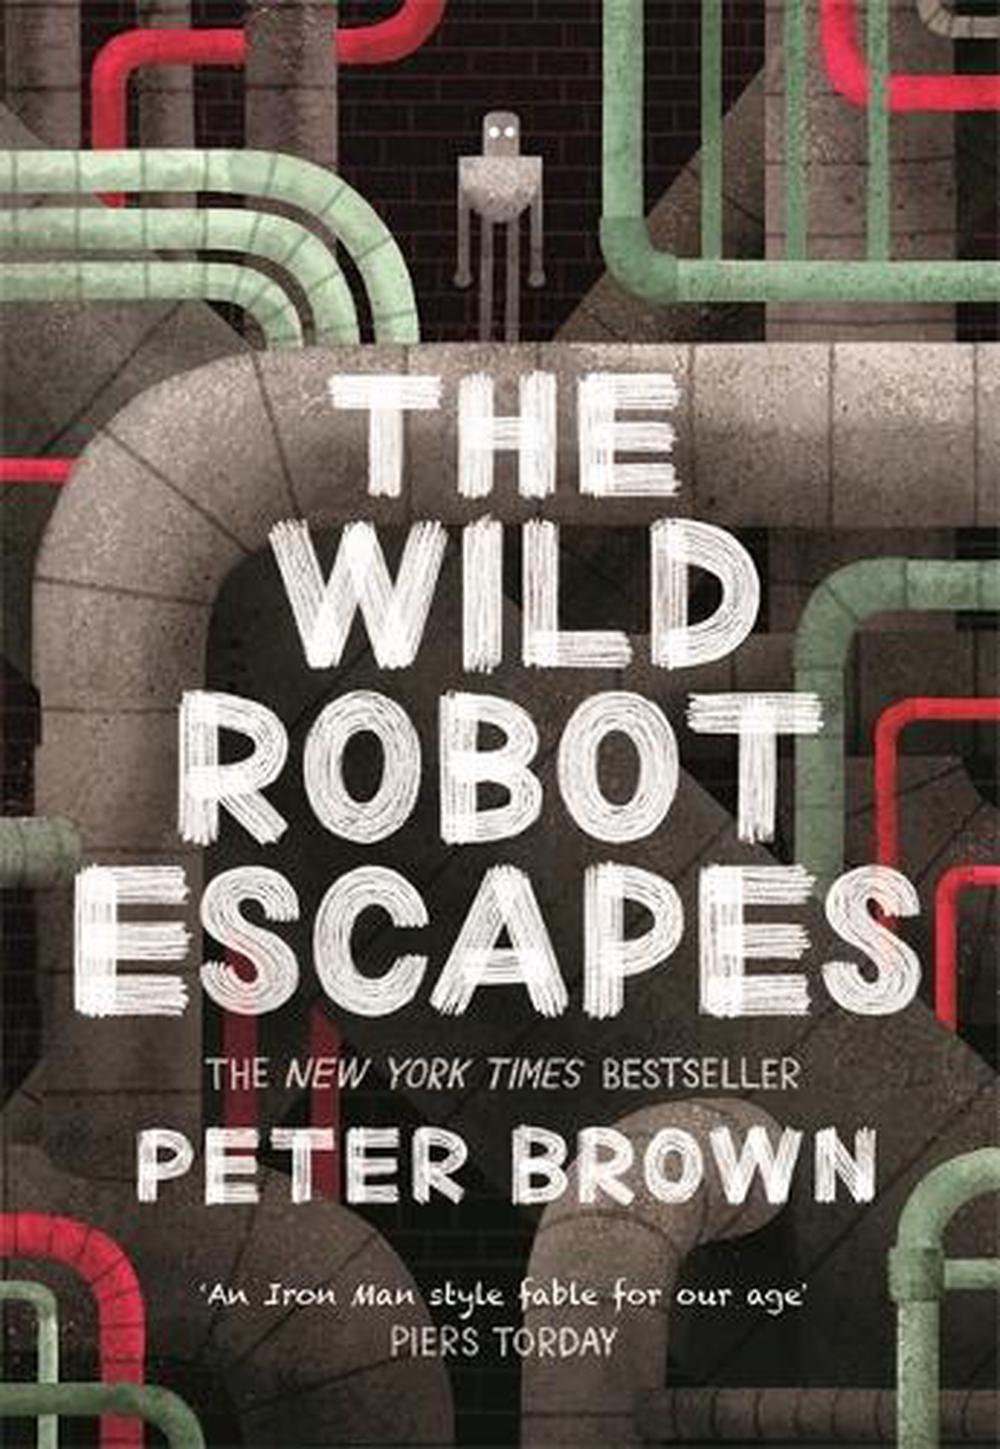 peter brown author of the wild robot